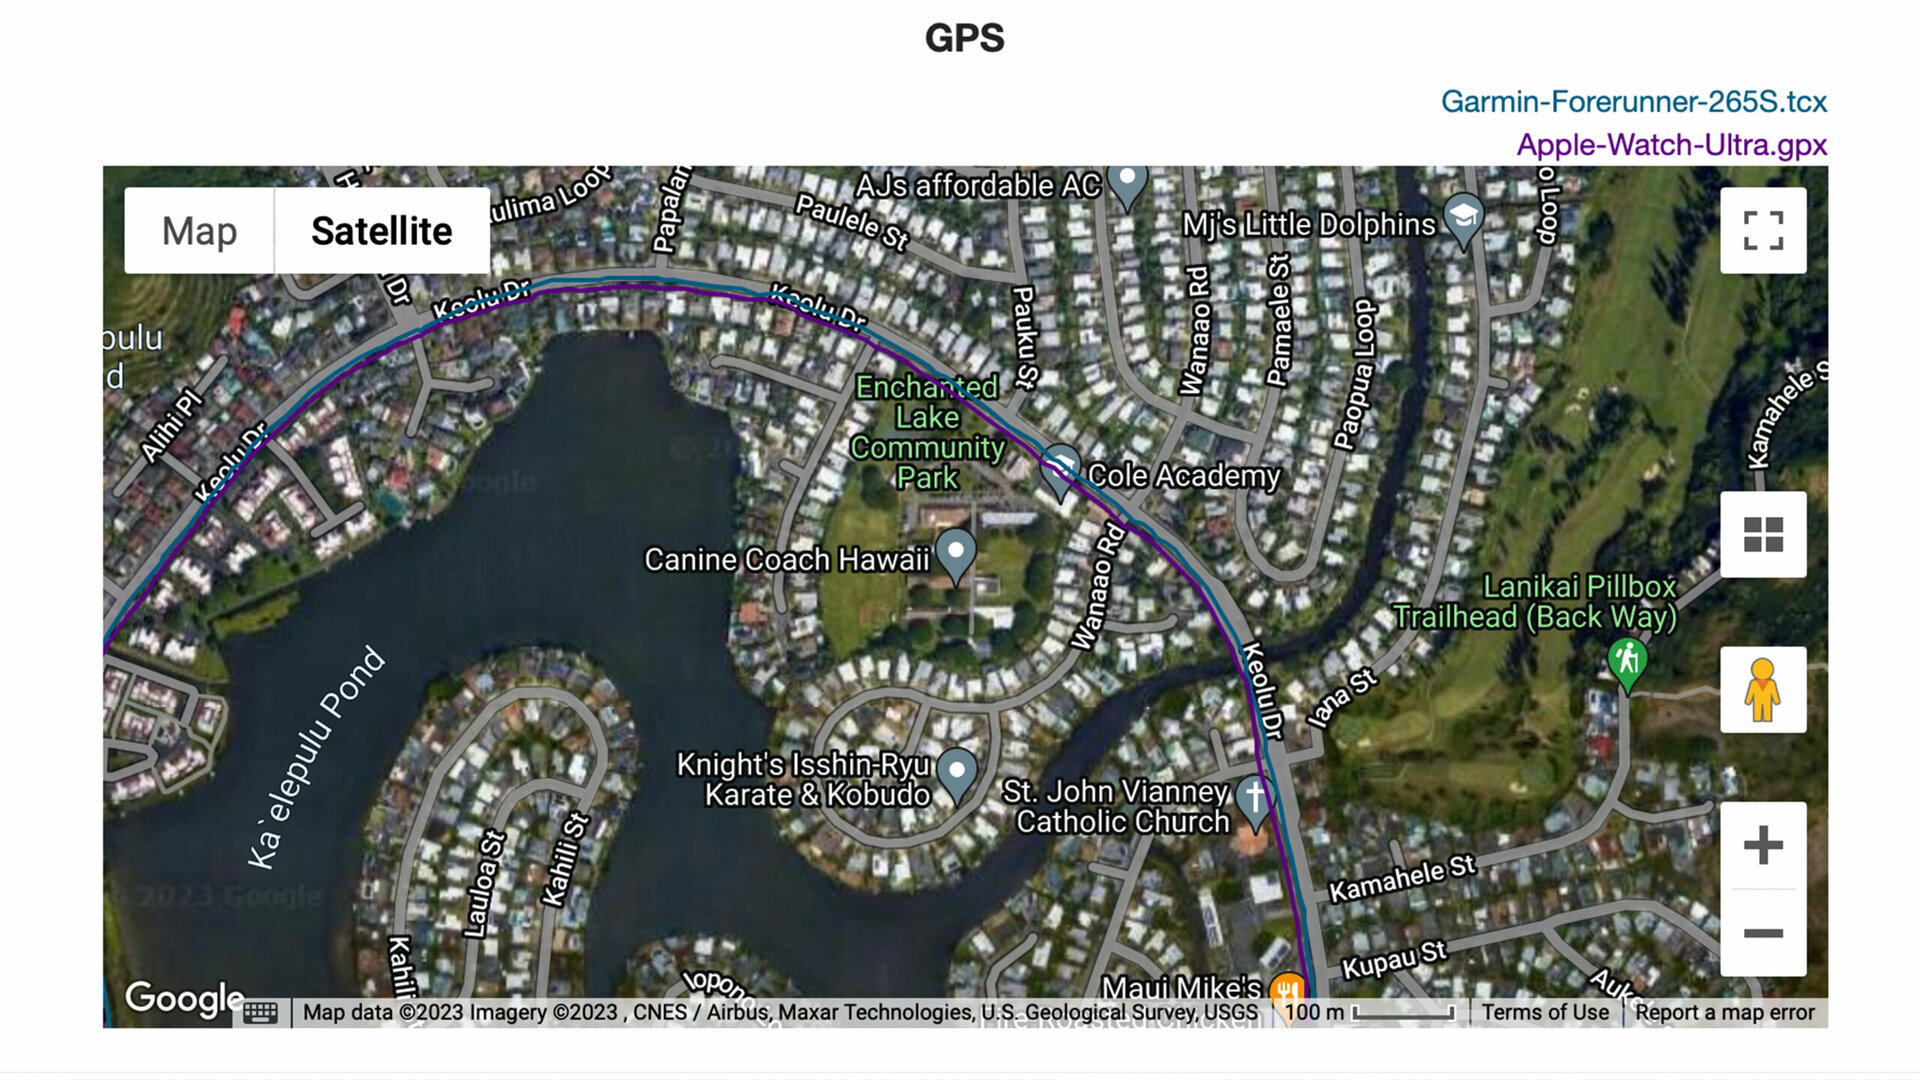 A GPS map depicts data from a Garmin Forerunner 265S and an Apple Watch Ultra.